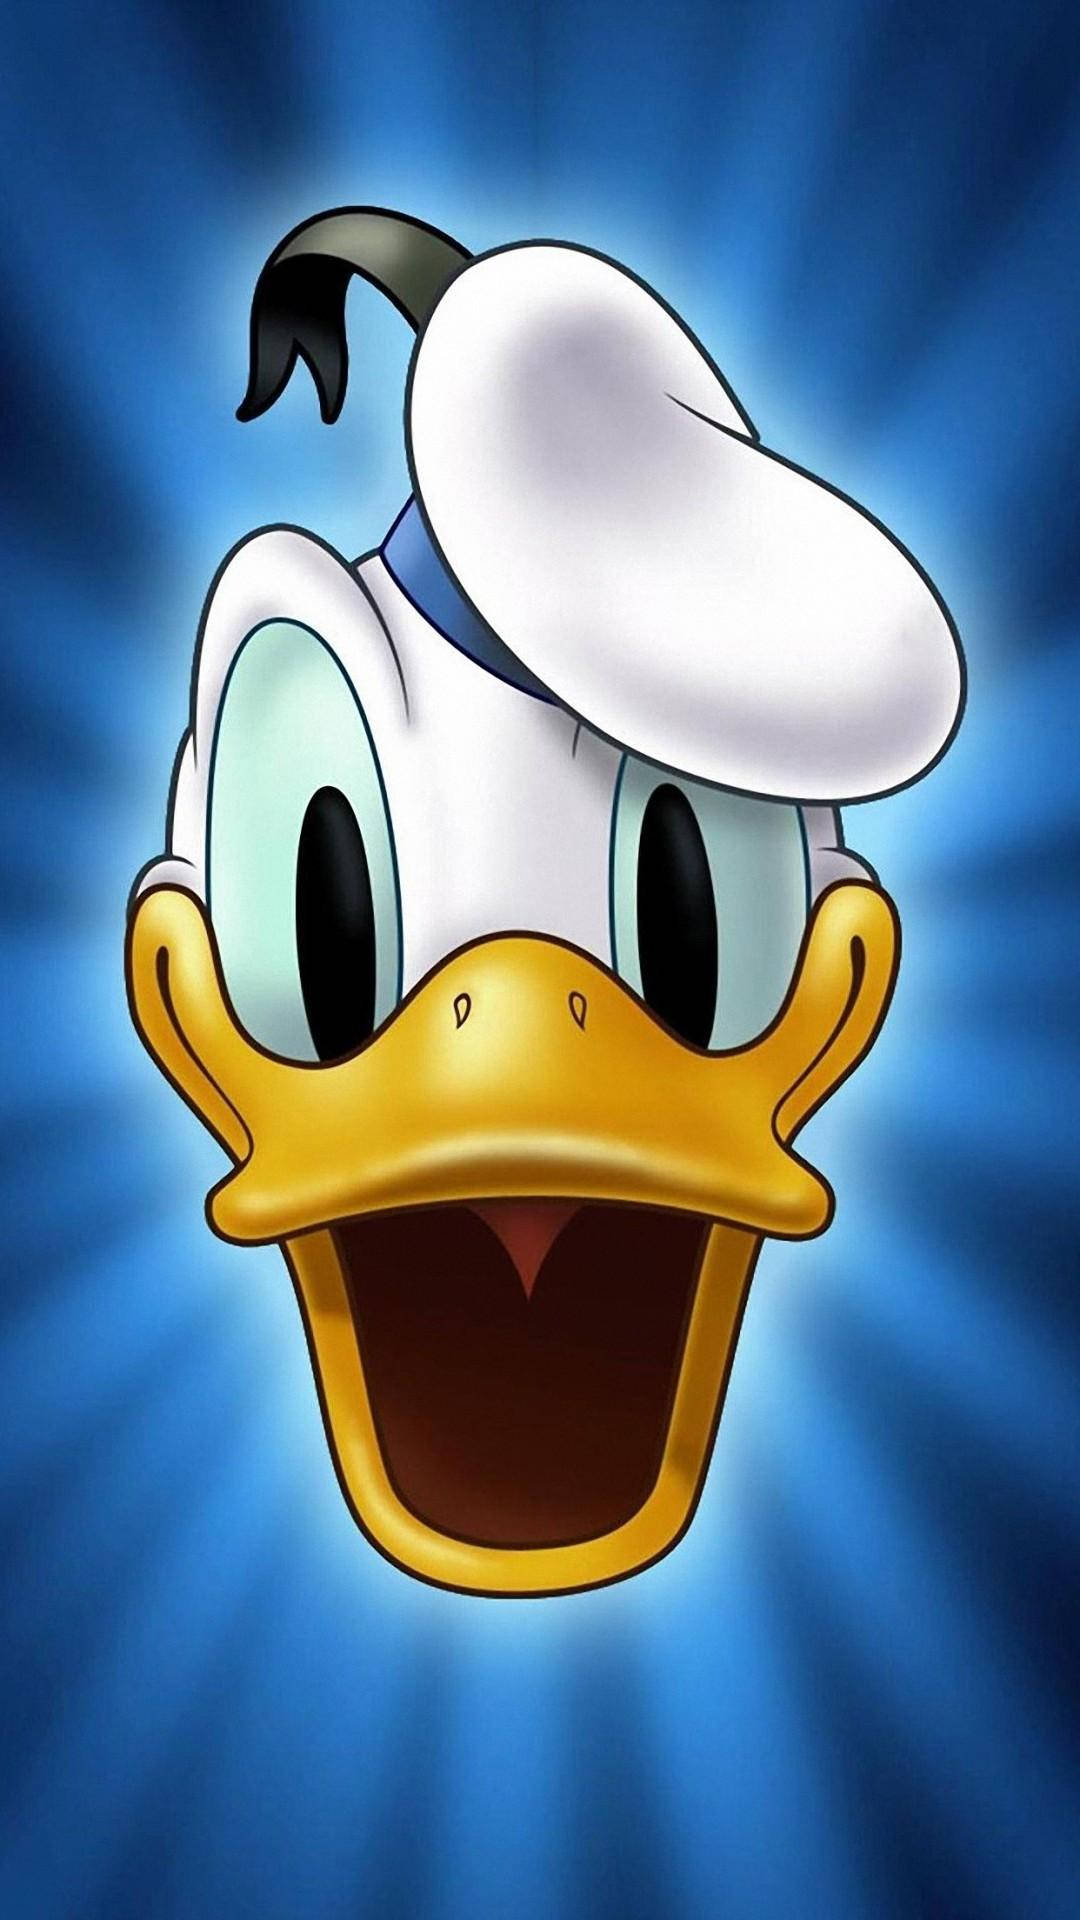 Full Hd Donald Duck Android Background